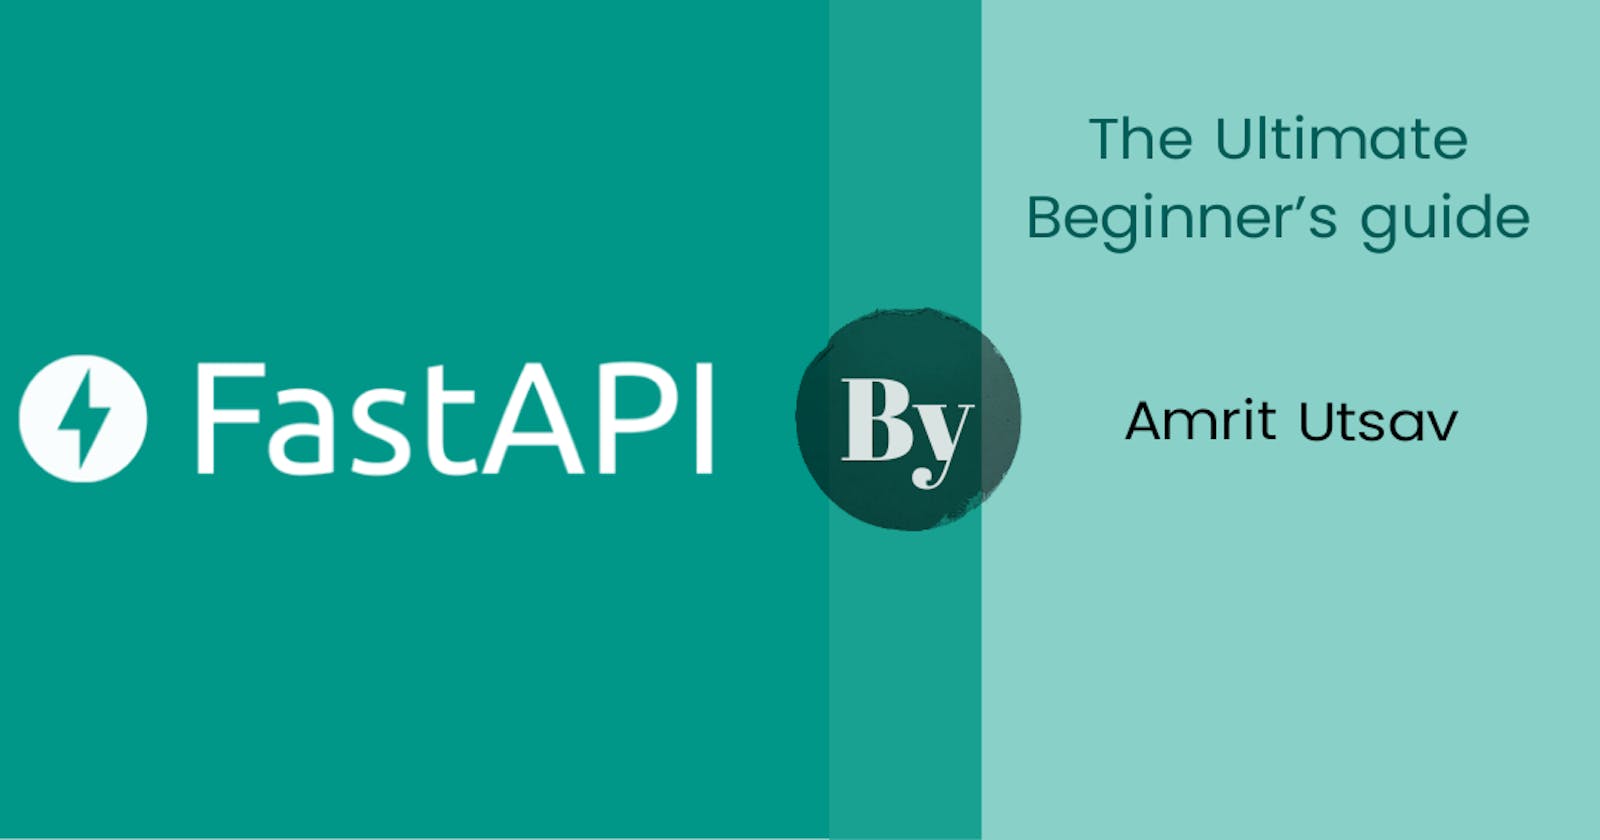 The ultimate beginner's guide to get started with FastAPI.